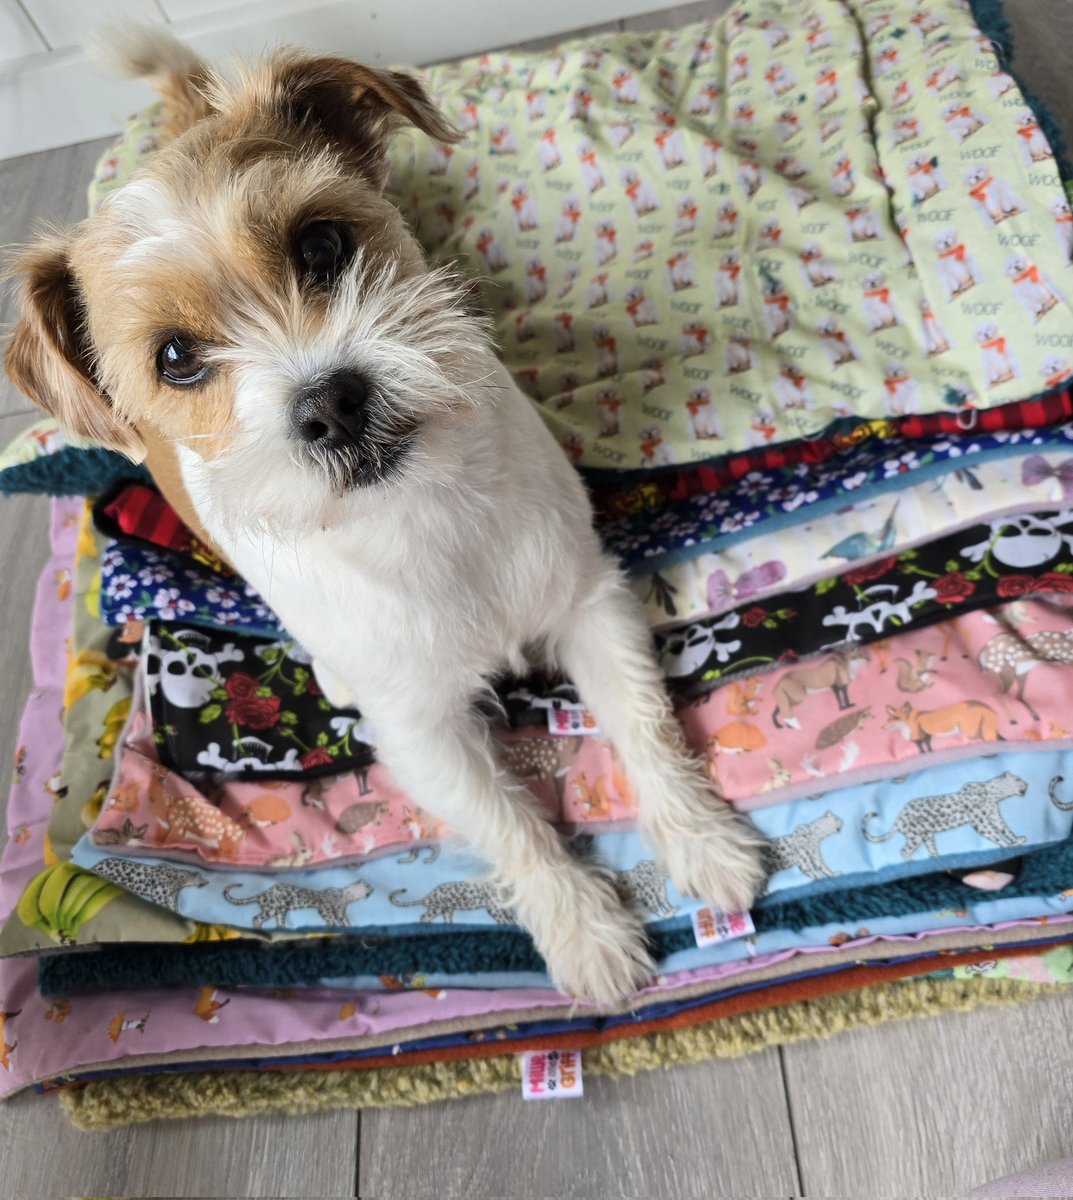 We're running a 30% off clearance sale on our Etsy! Including birthday blankets, patchwork sherpa, Christmas styles & more, only £10 while stocks last! Making way for new summer styles 🥰 check it out >> etsy.com/uk/listing/168… #dogsofX